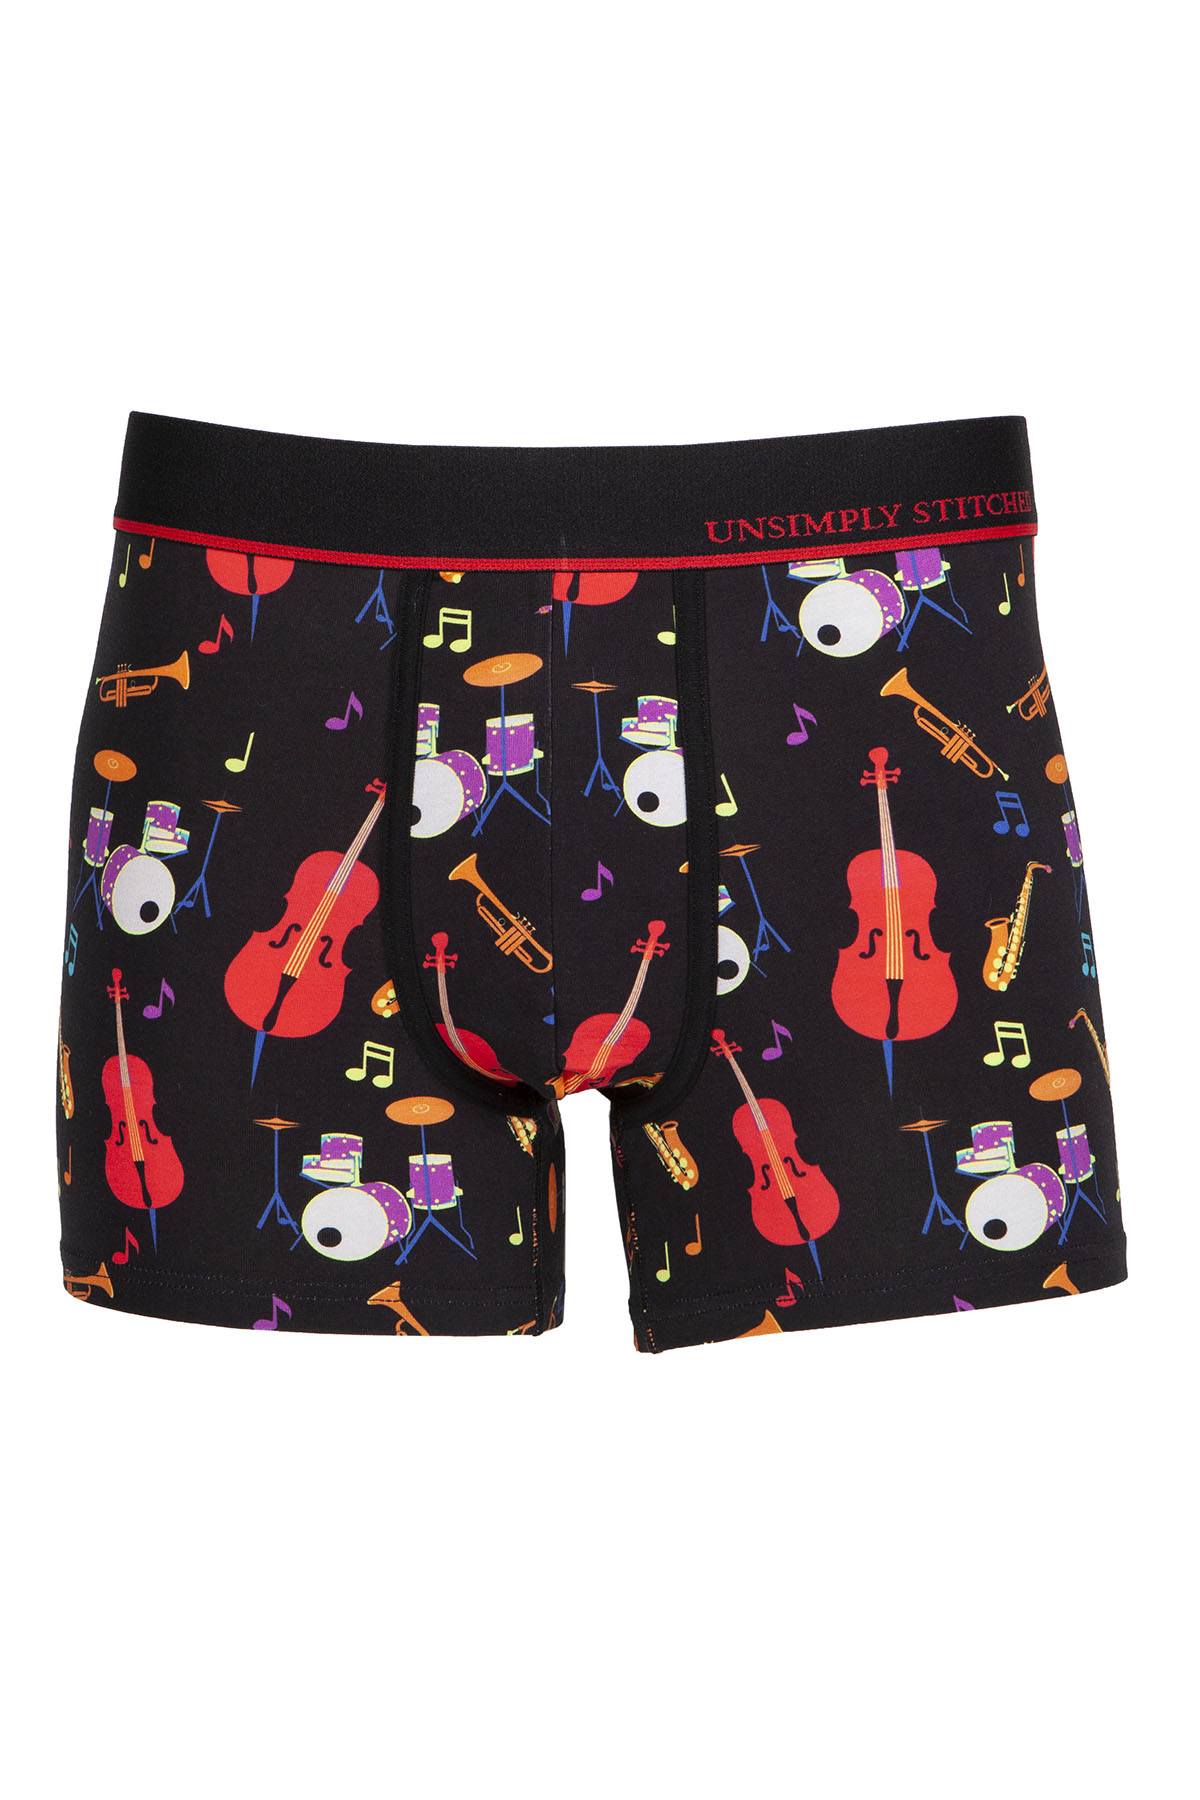 Unsimply Stitched Black Musical Trunk